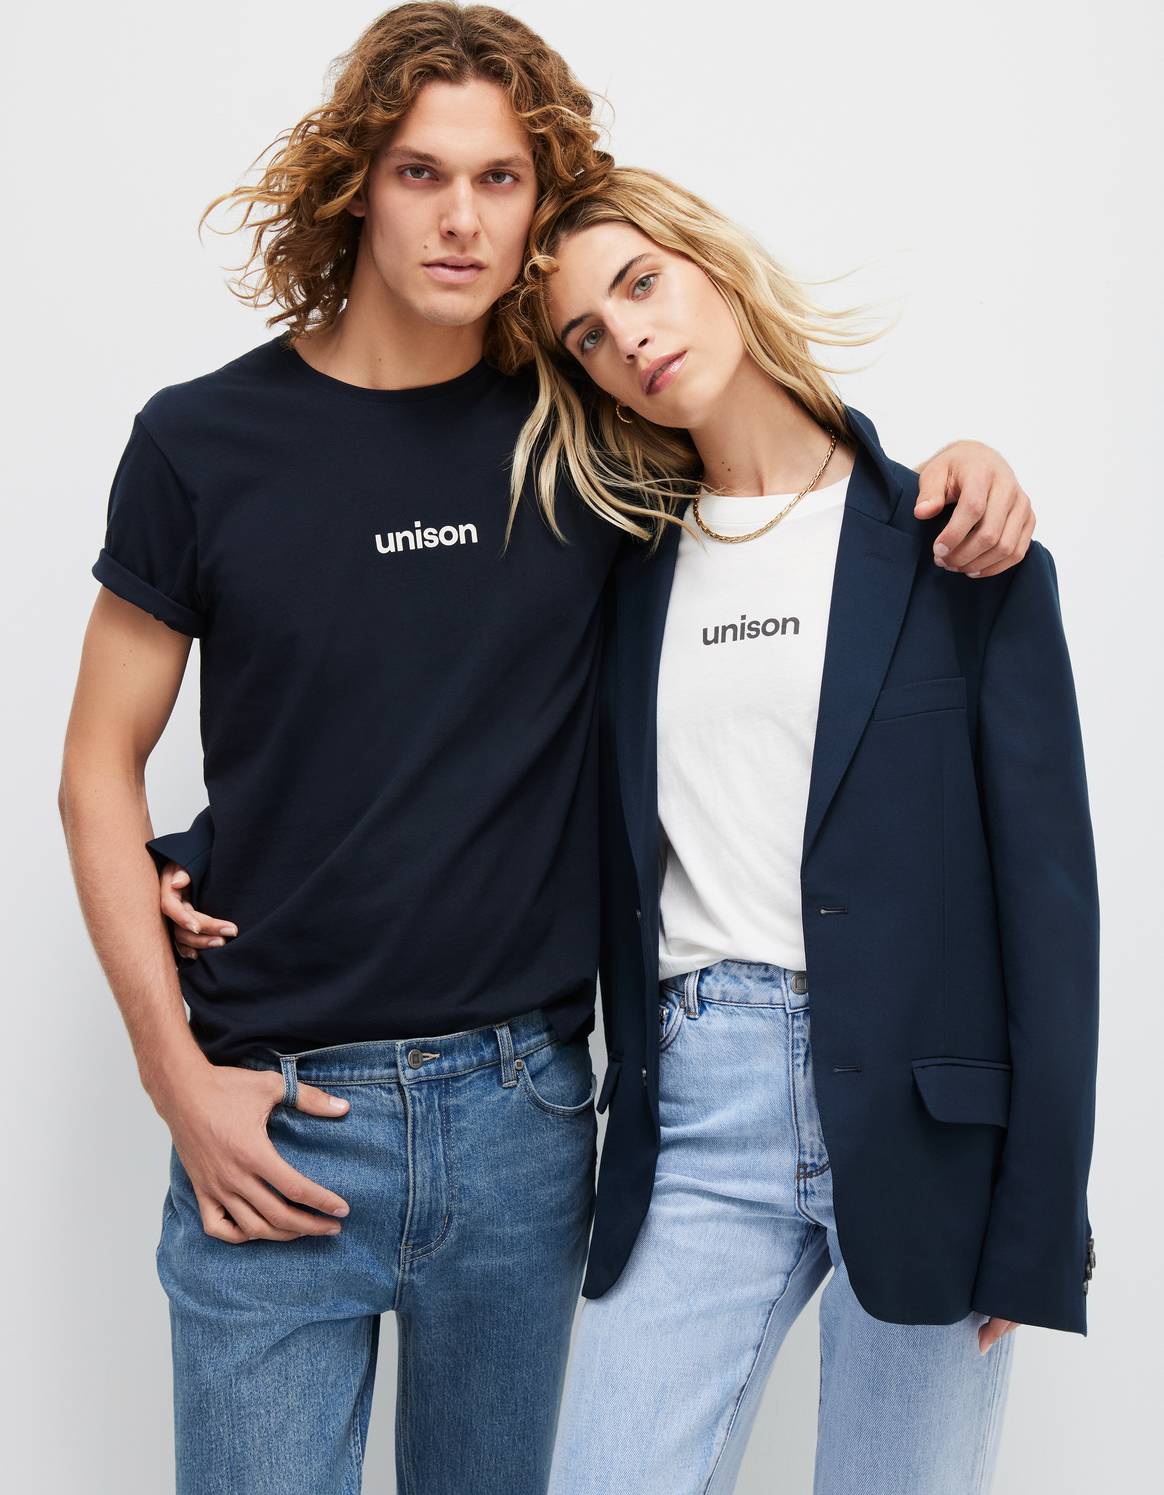 Credits: Brandbank Group by Manolo Campion; French Connection Australia rebrands as Unison